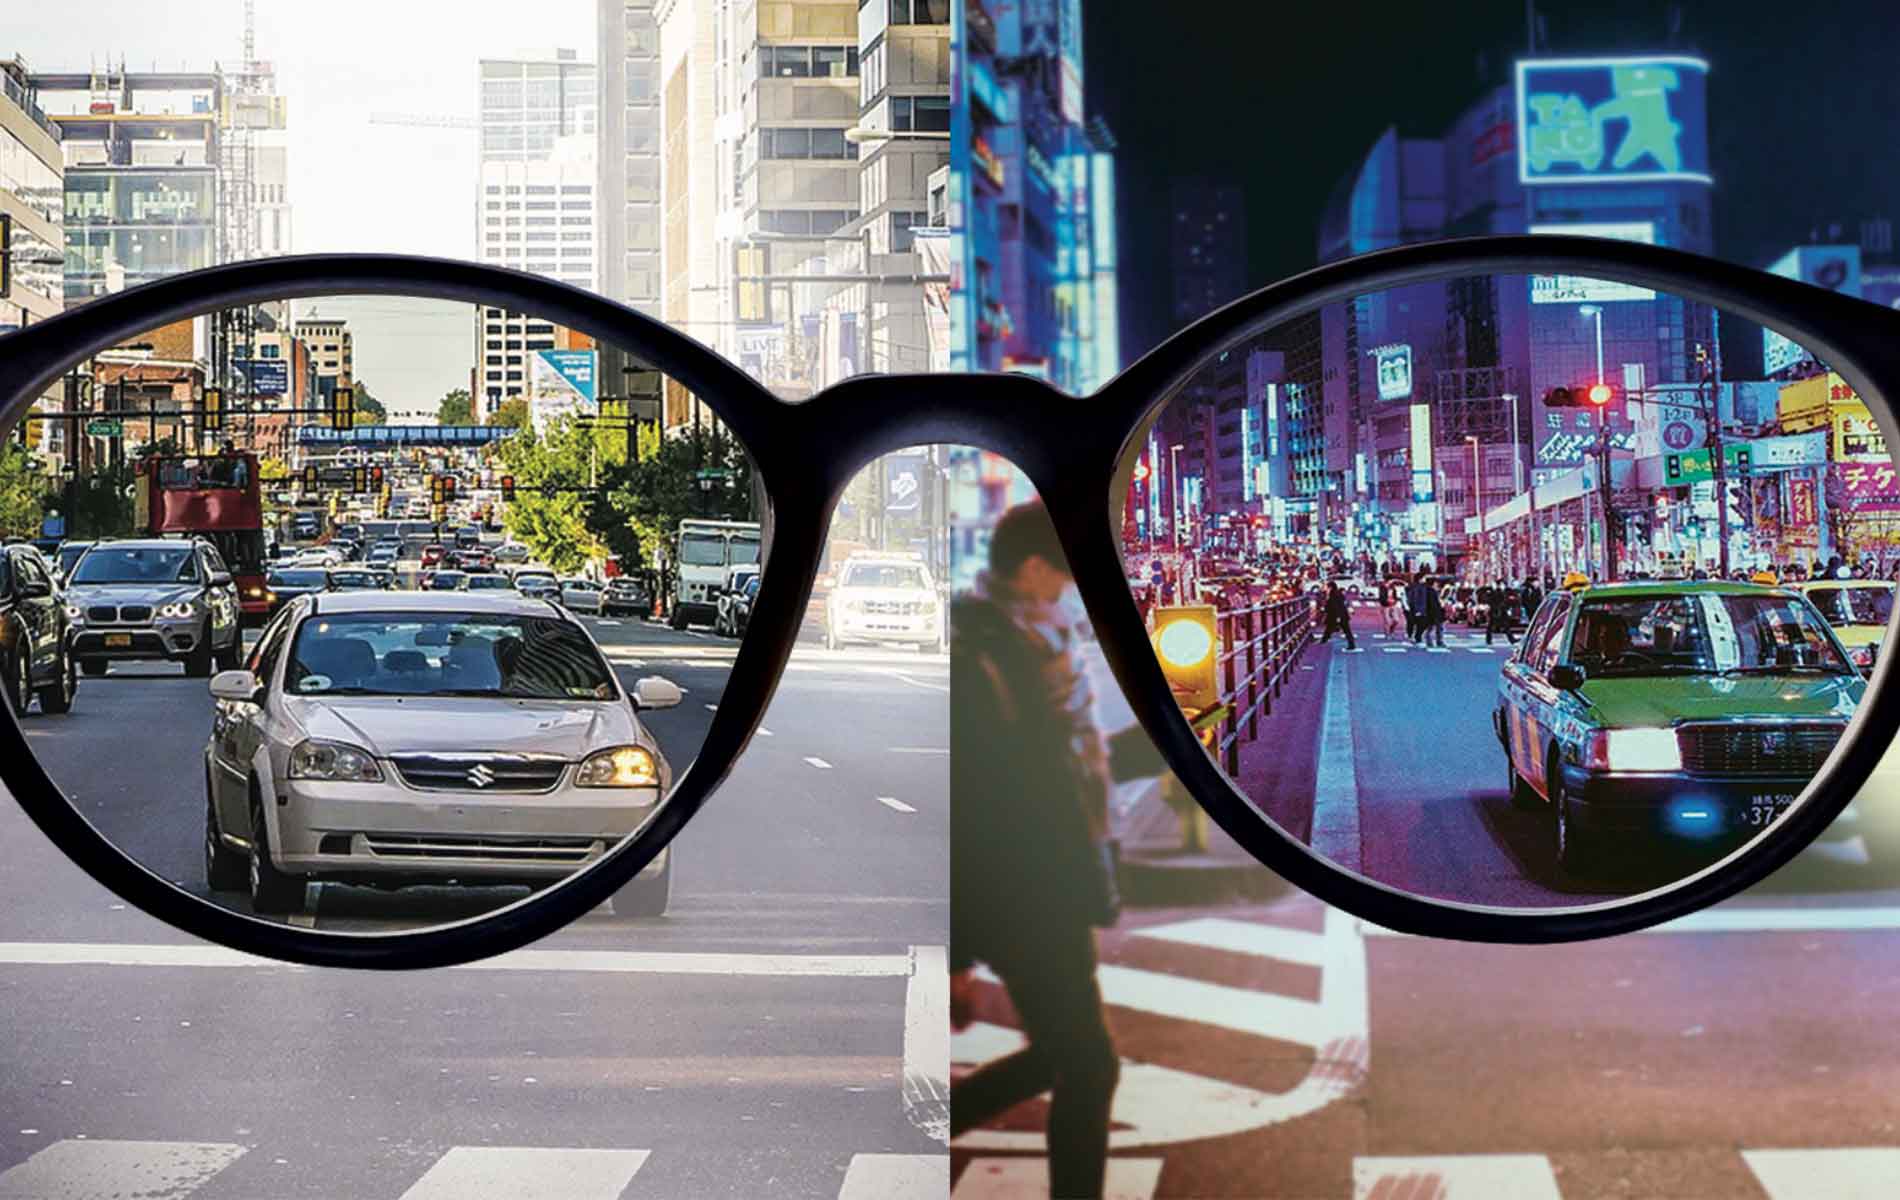 split image of a city during the day and night seen through the glasses